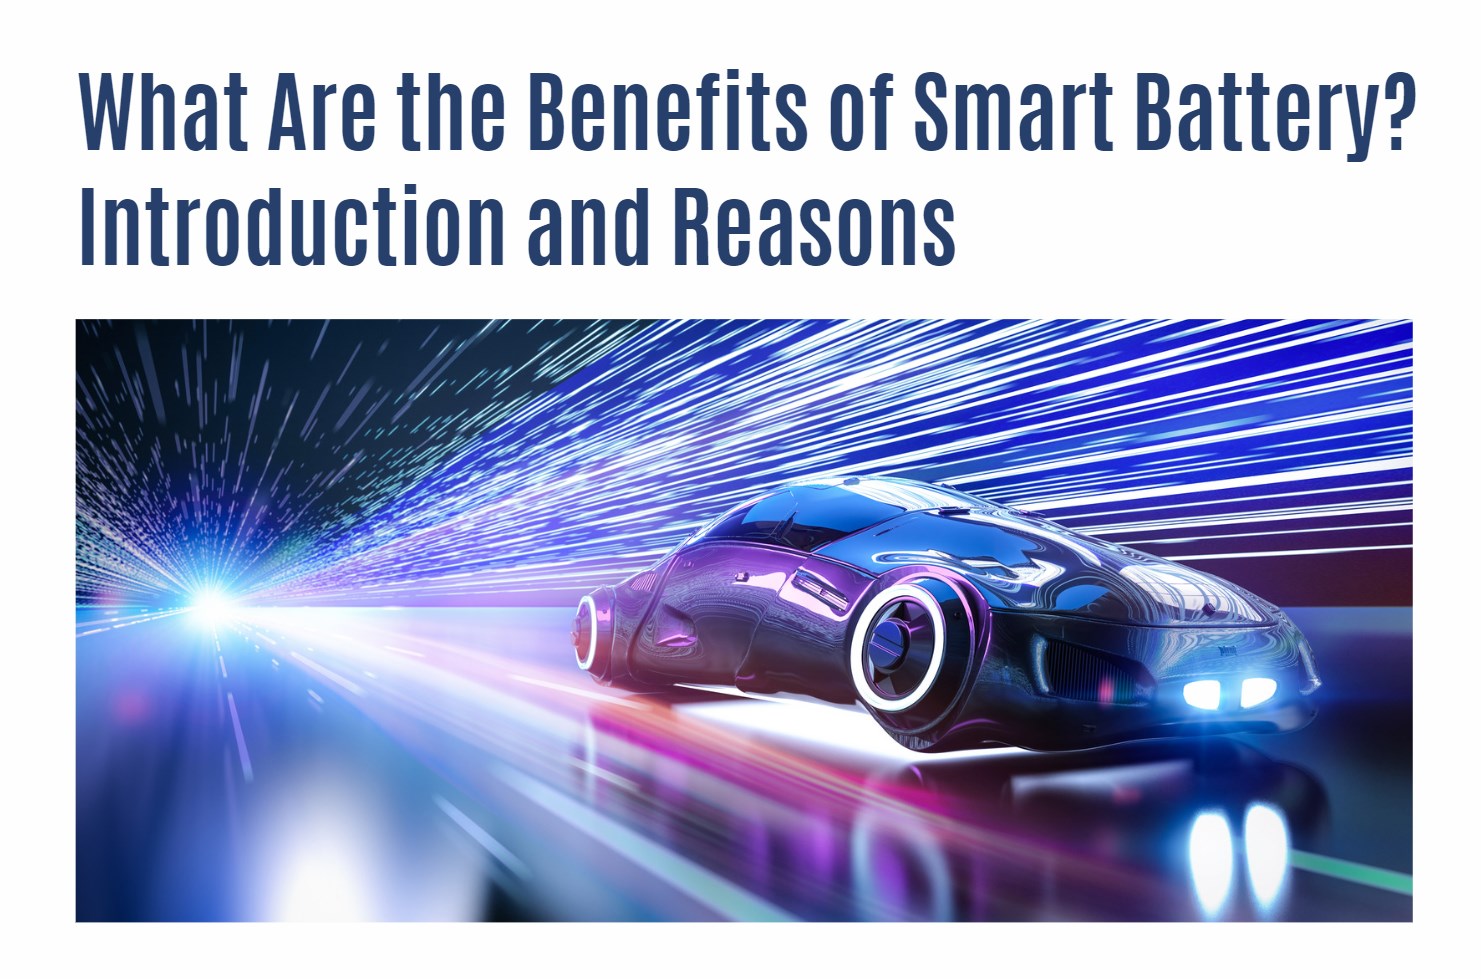 What Are the Benefits of Smart Battery? Introduction and Reasons